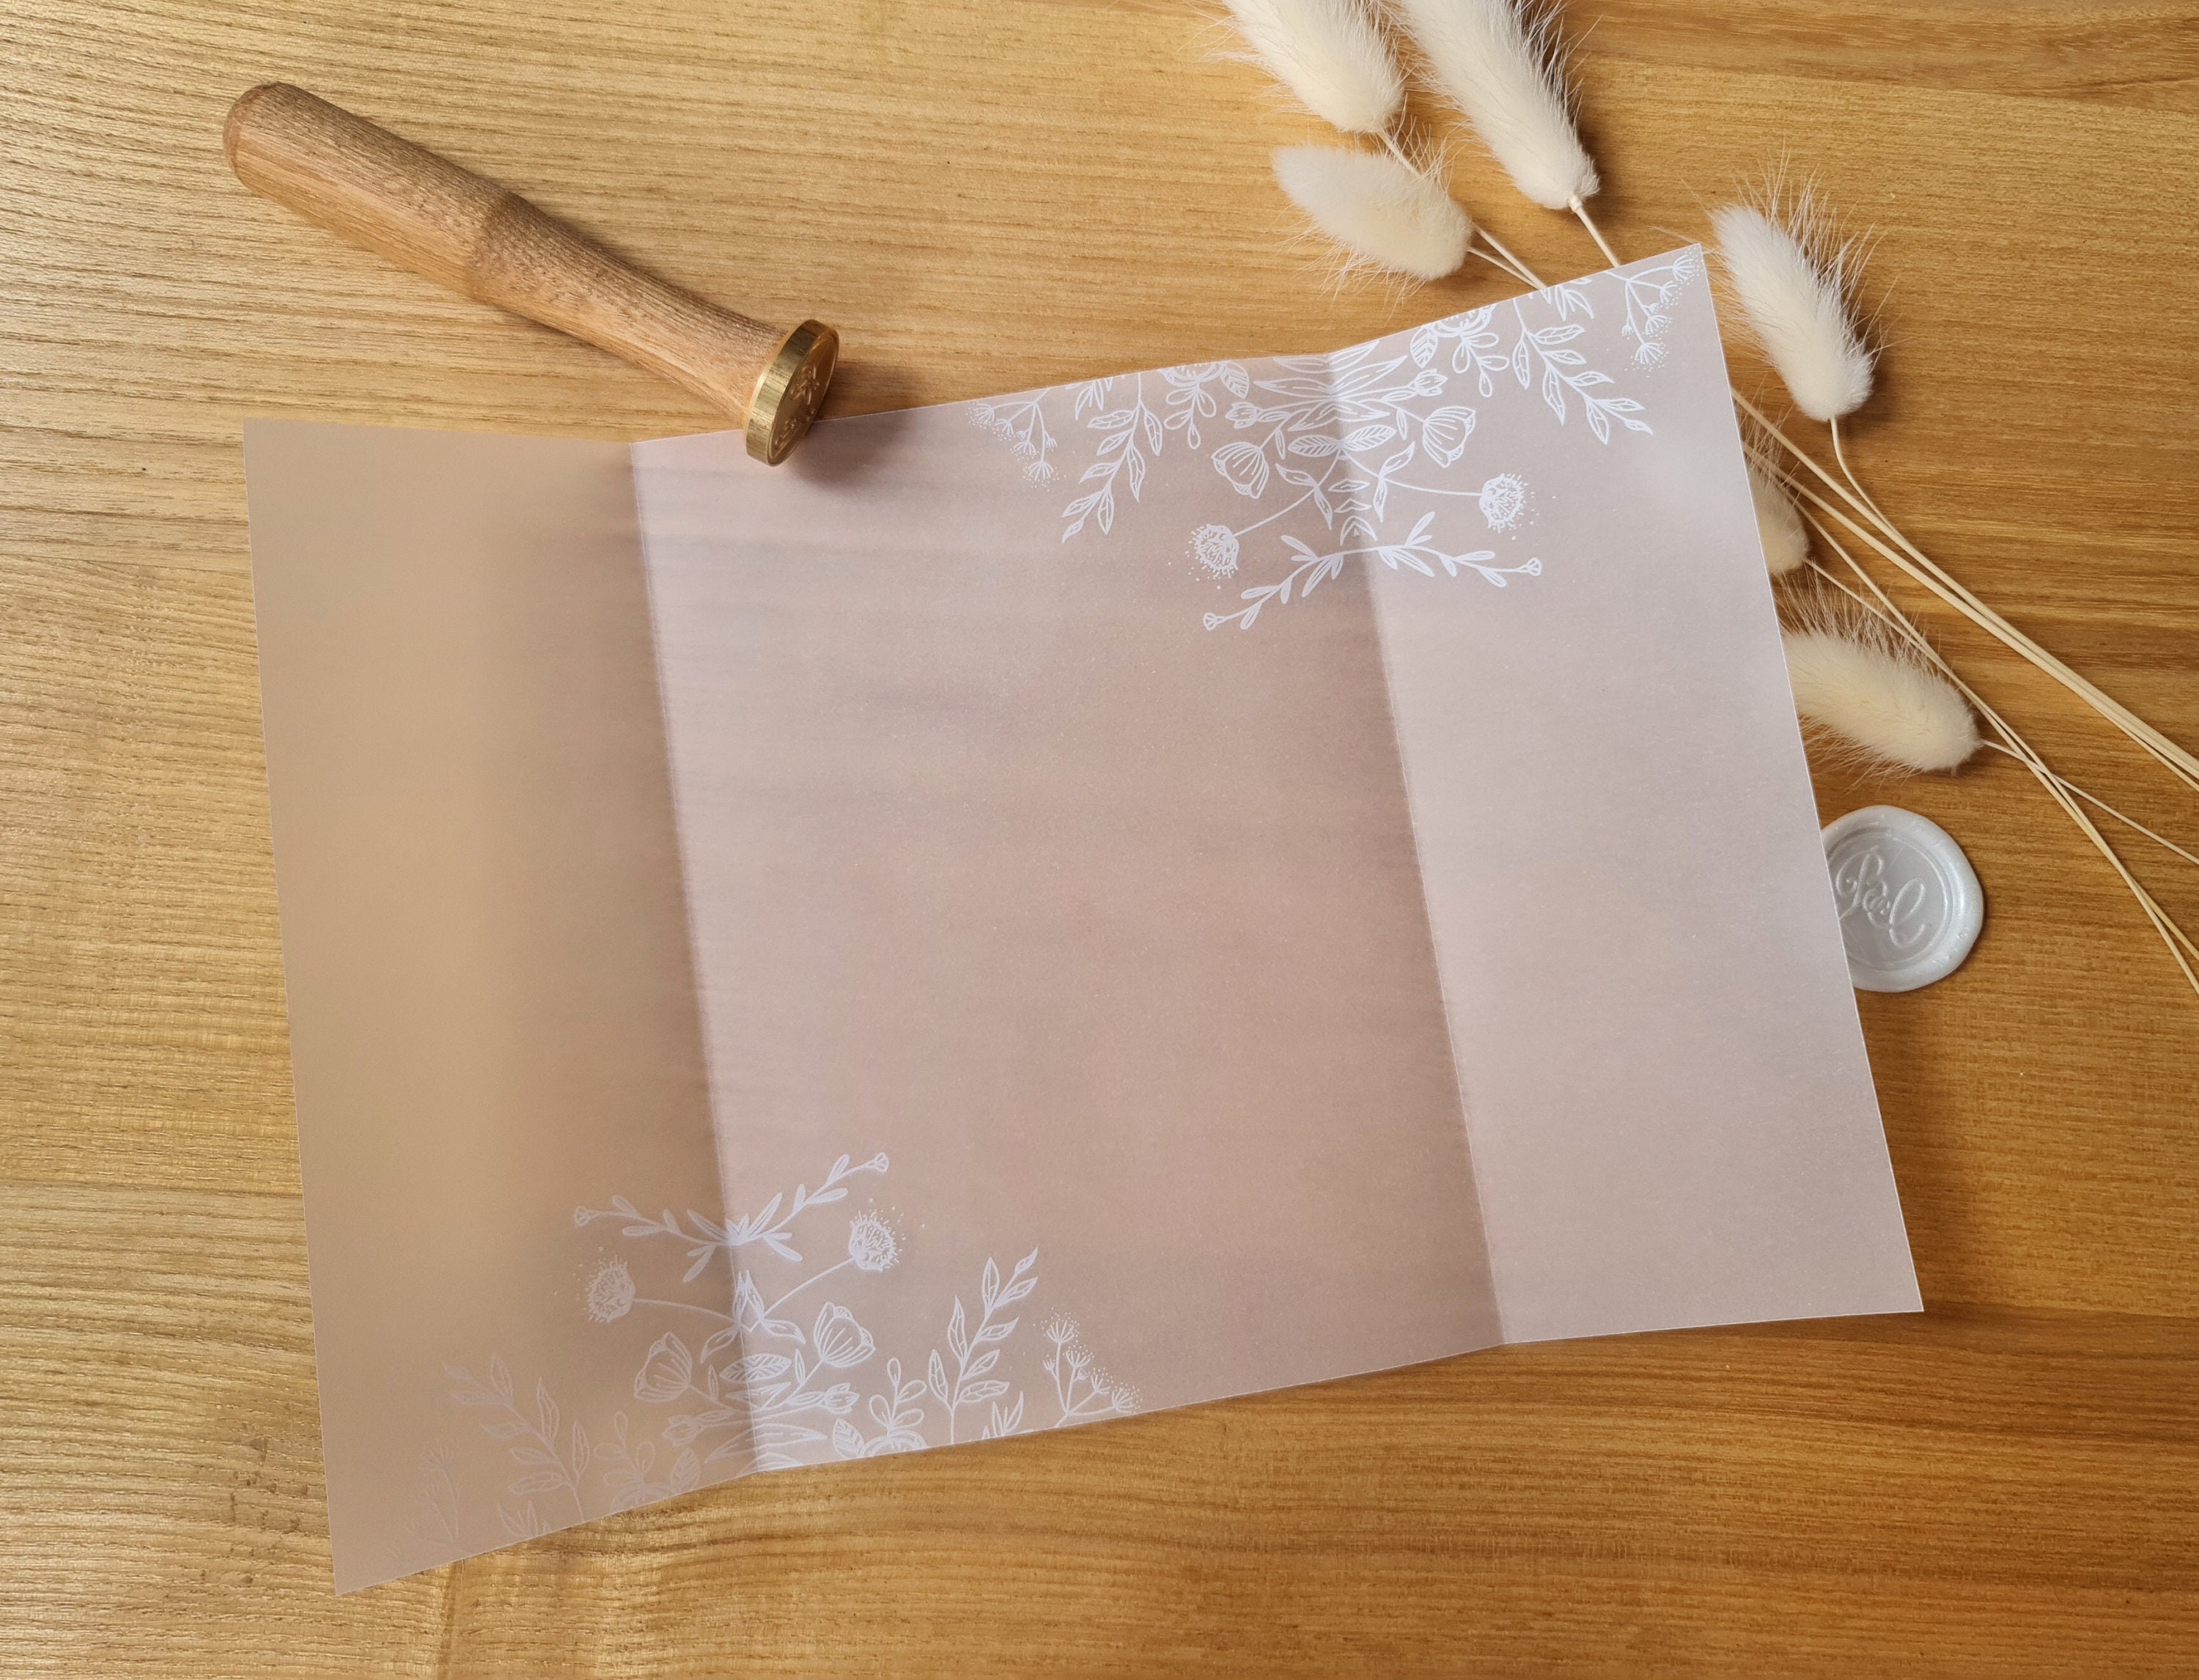 LAARIA Pre-Folded Vellum Jackets for Invitations: 5x7 Translucent Vellum  Paper with Adhesive Stickers & Natural Dried Pressed Flowers - Translucent